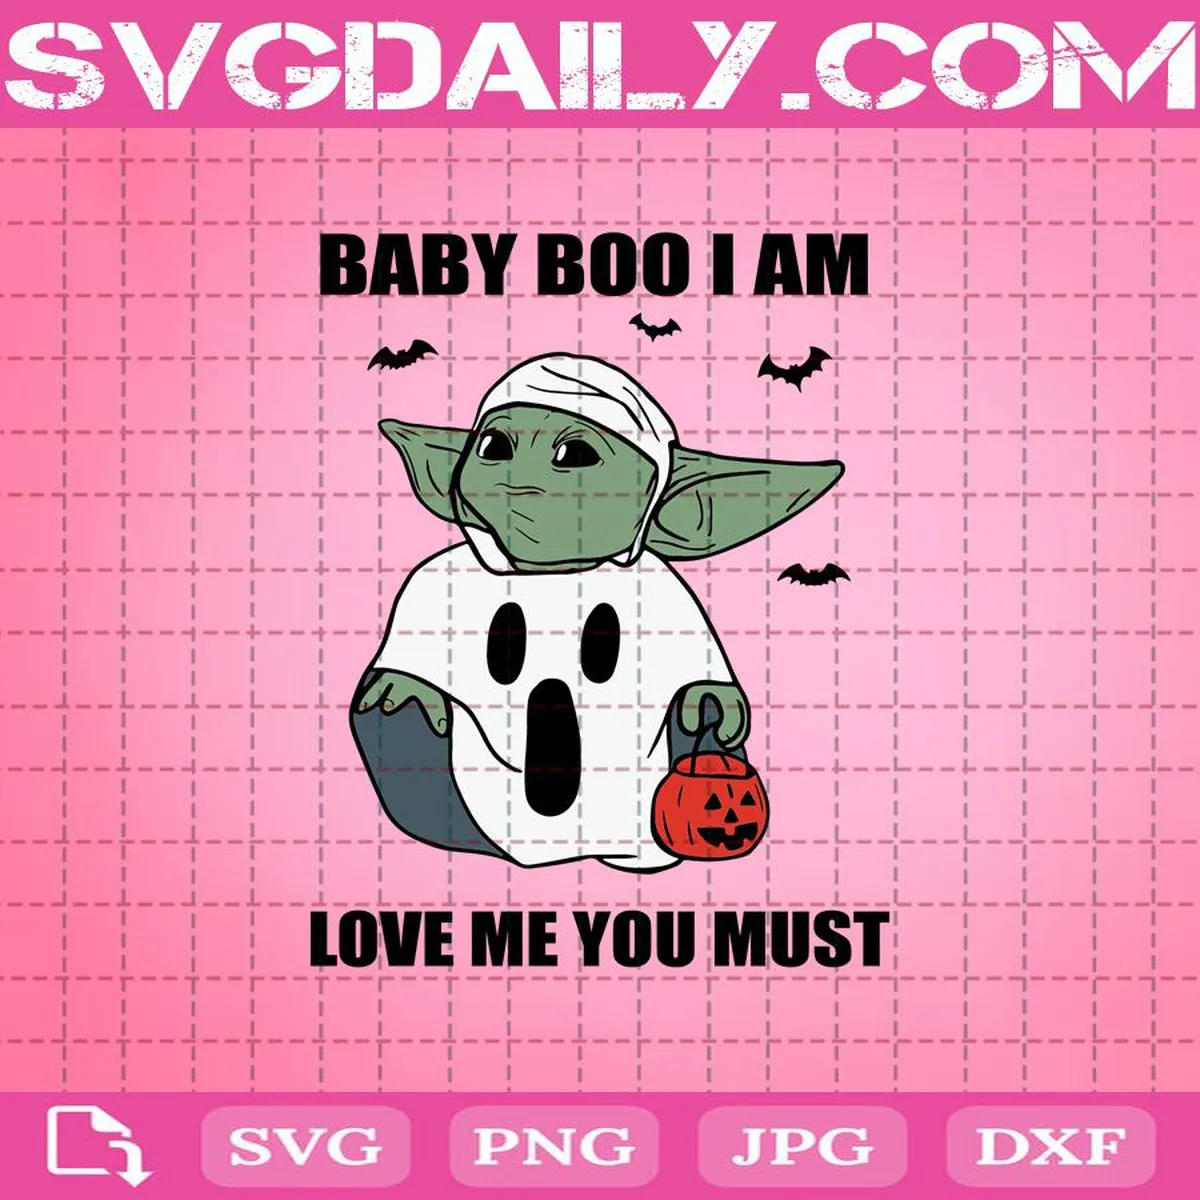 Baby Yoda Baby Boo I Am Love Me You Must Halloween Svg